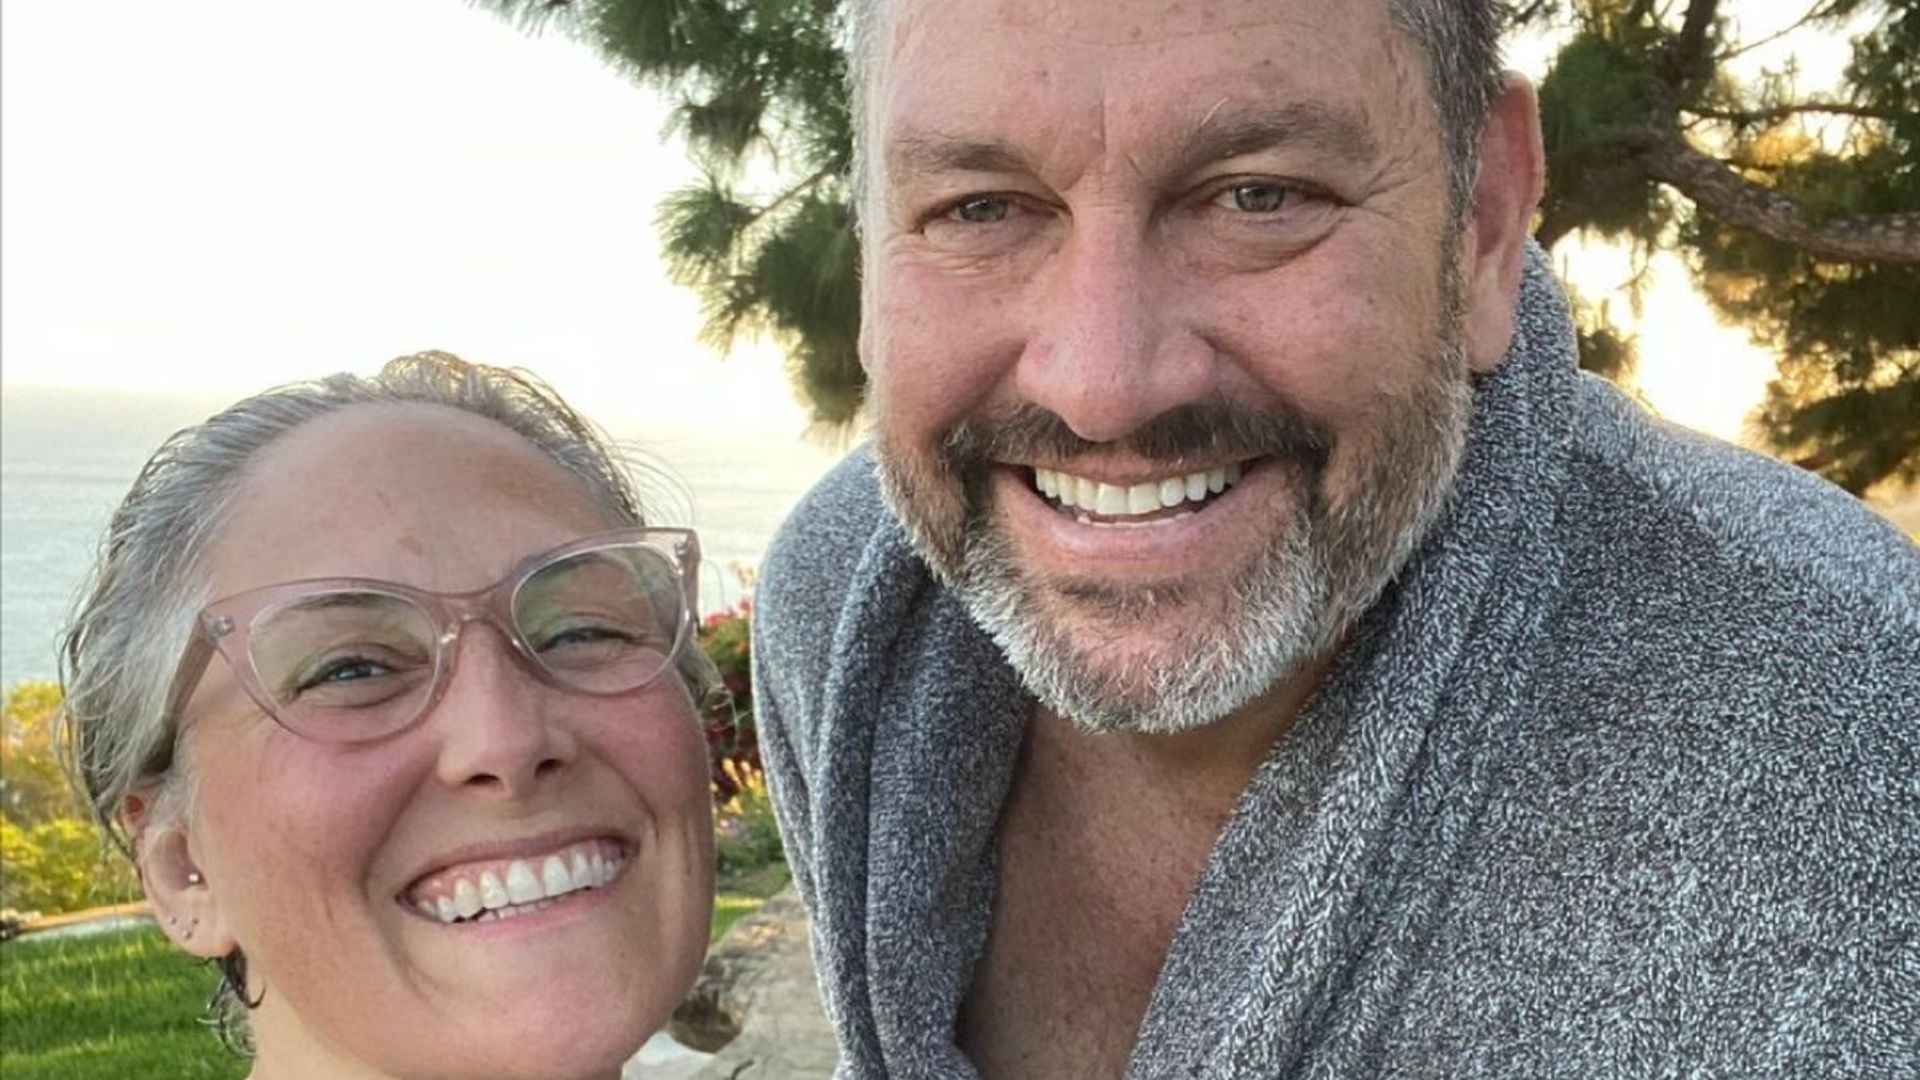 Details About American TV Host Ricki Lake’s Husband And Her Personal Life- Facts To Know